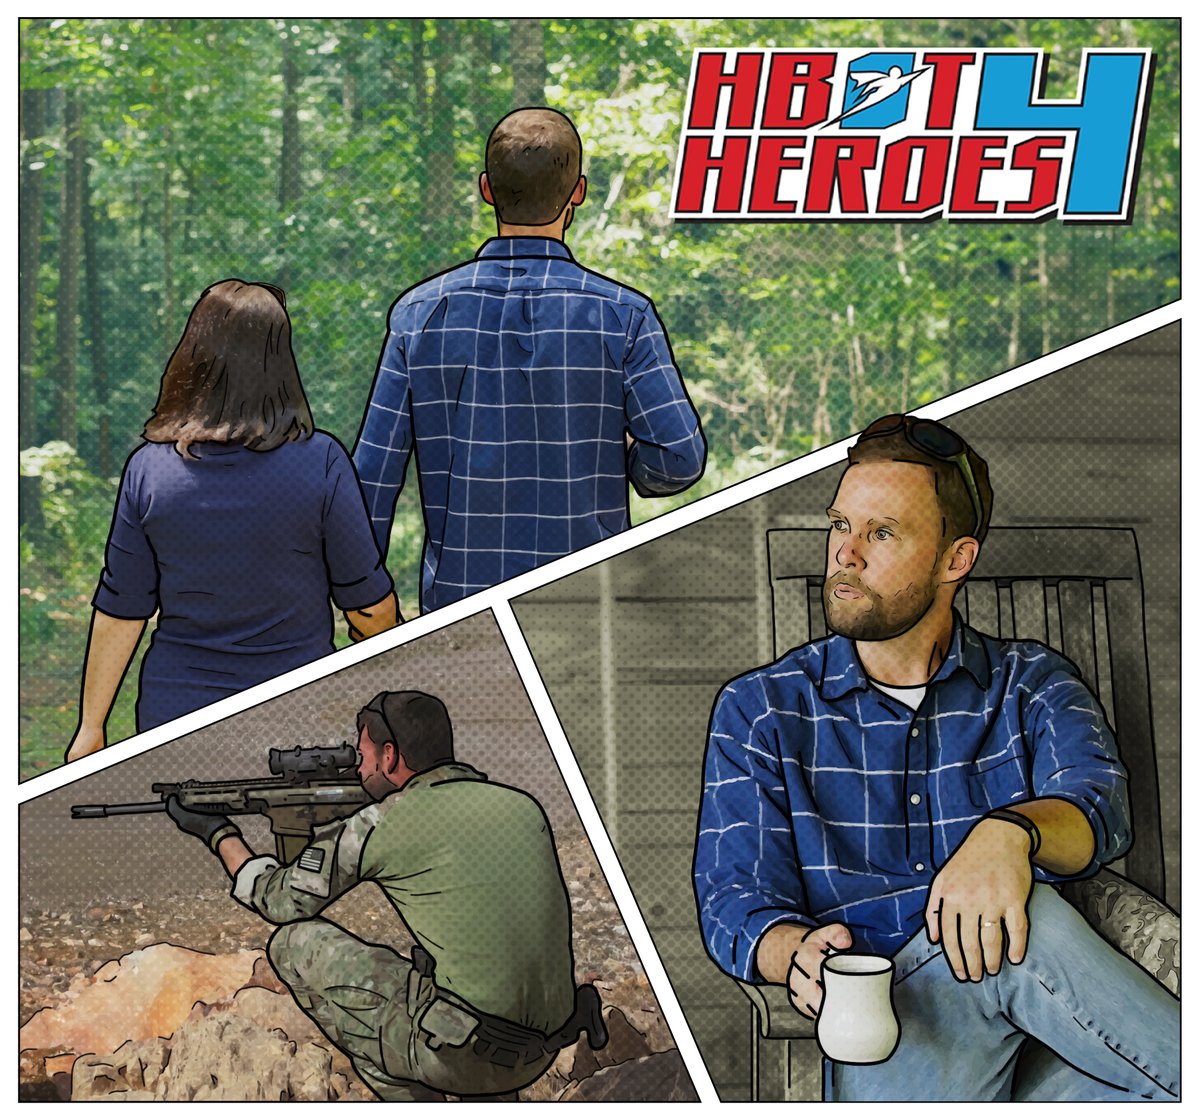 HBOT is more than therapy; it's a journey to a promising future for our wounded warriors. 

Read the reviews, watch the testimonials, and get involved!
🎥  hbot4heroes.org/testimonials/ 

#healingheroes #stopveteransuicide #TBIwarrior #PTSDawareness #HBOTheals